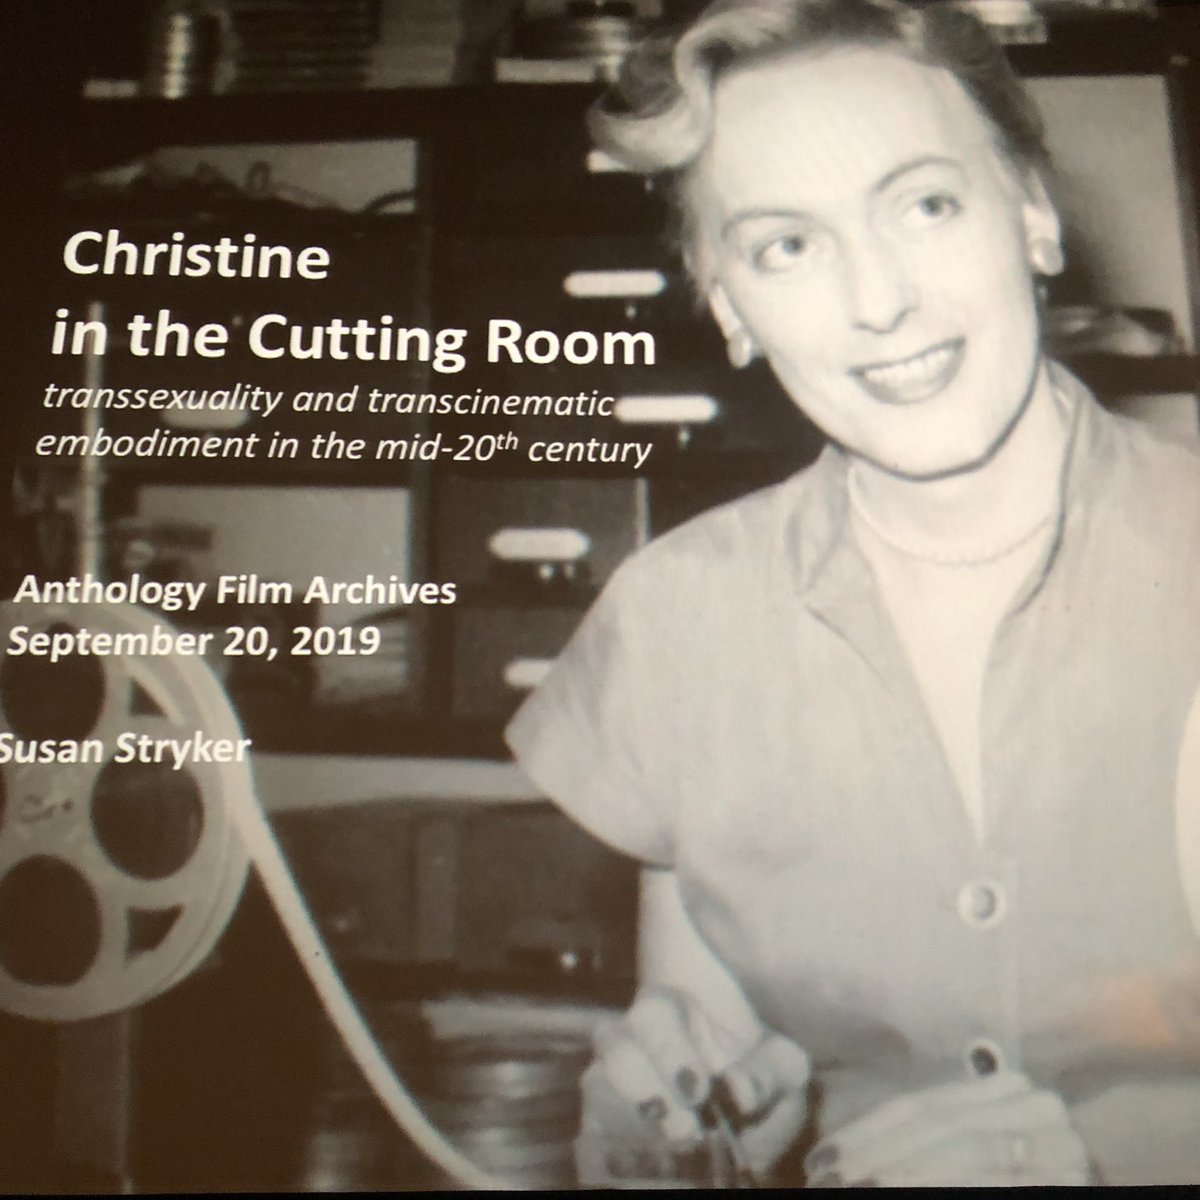 Chica marx on Twitter: "Susan Stryker's film at @AnthologyFilm. Christine  Jorgensen worked in film processing/editing. The parallel editing of cinema  and bodies. https://t.co/5jFMnJ7MFv" / Twitter